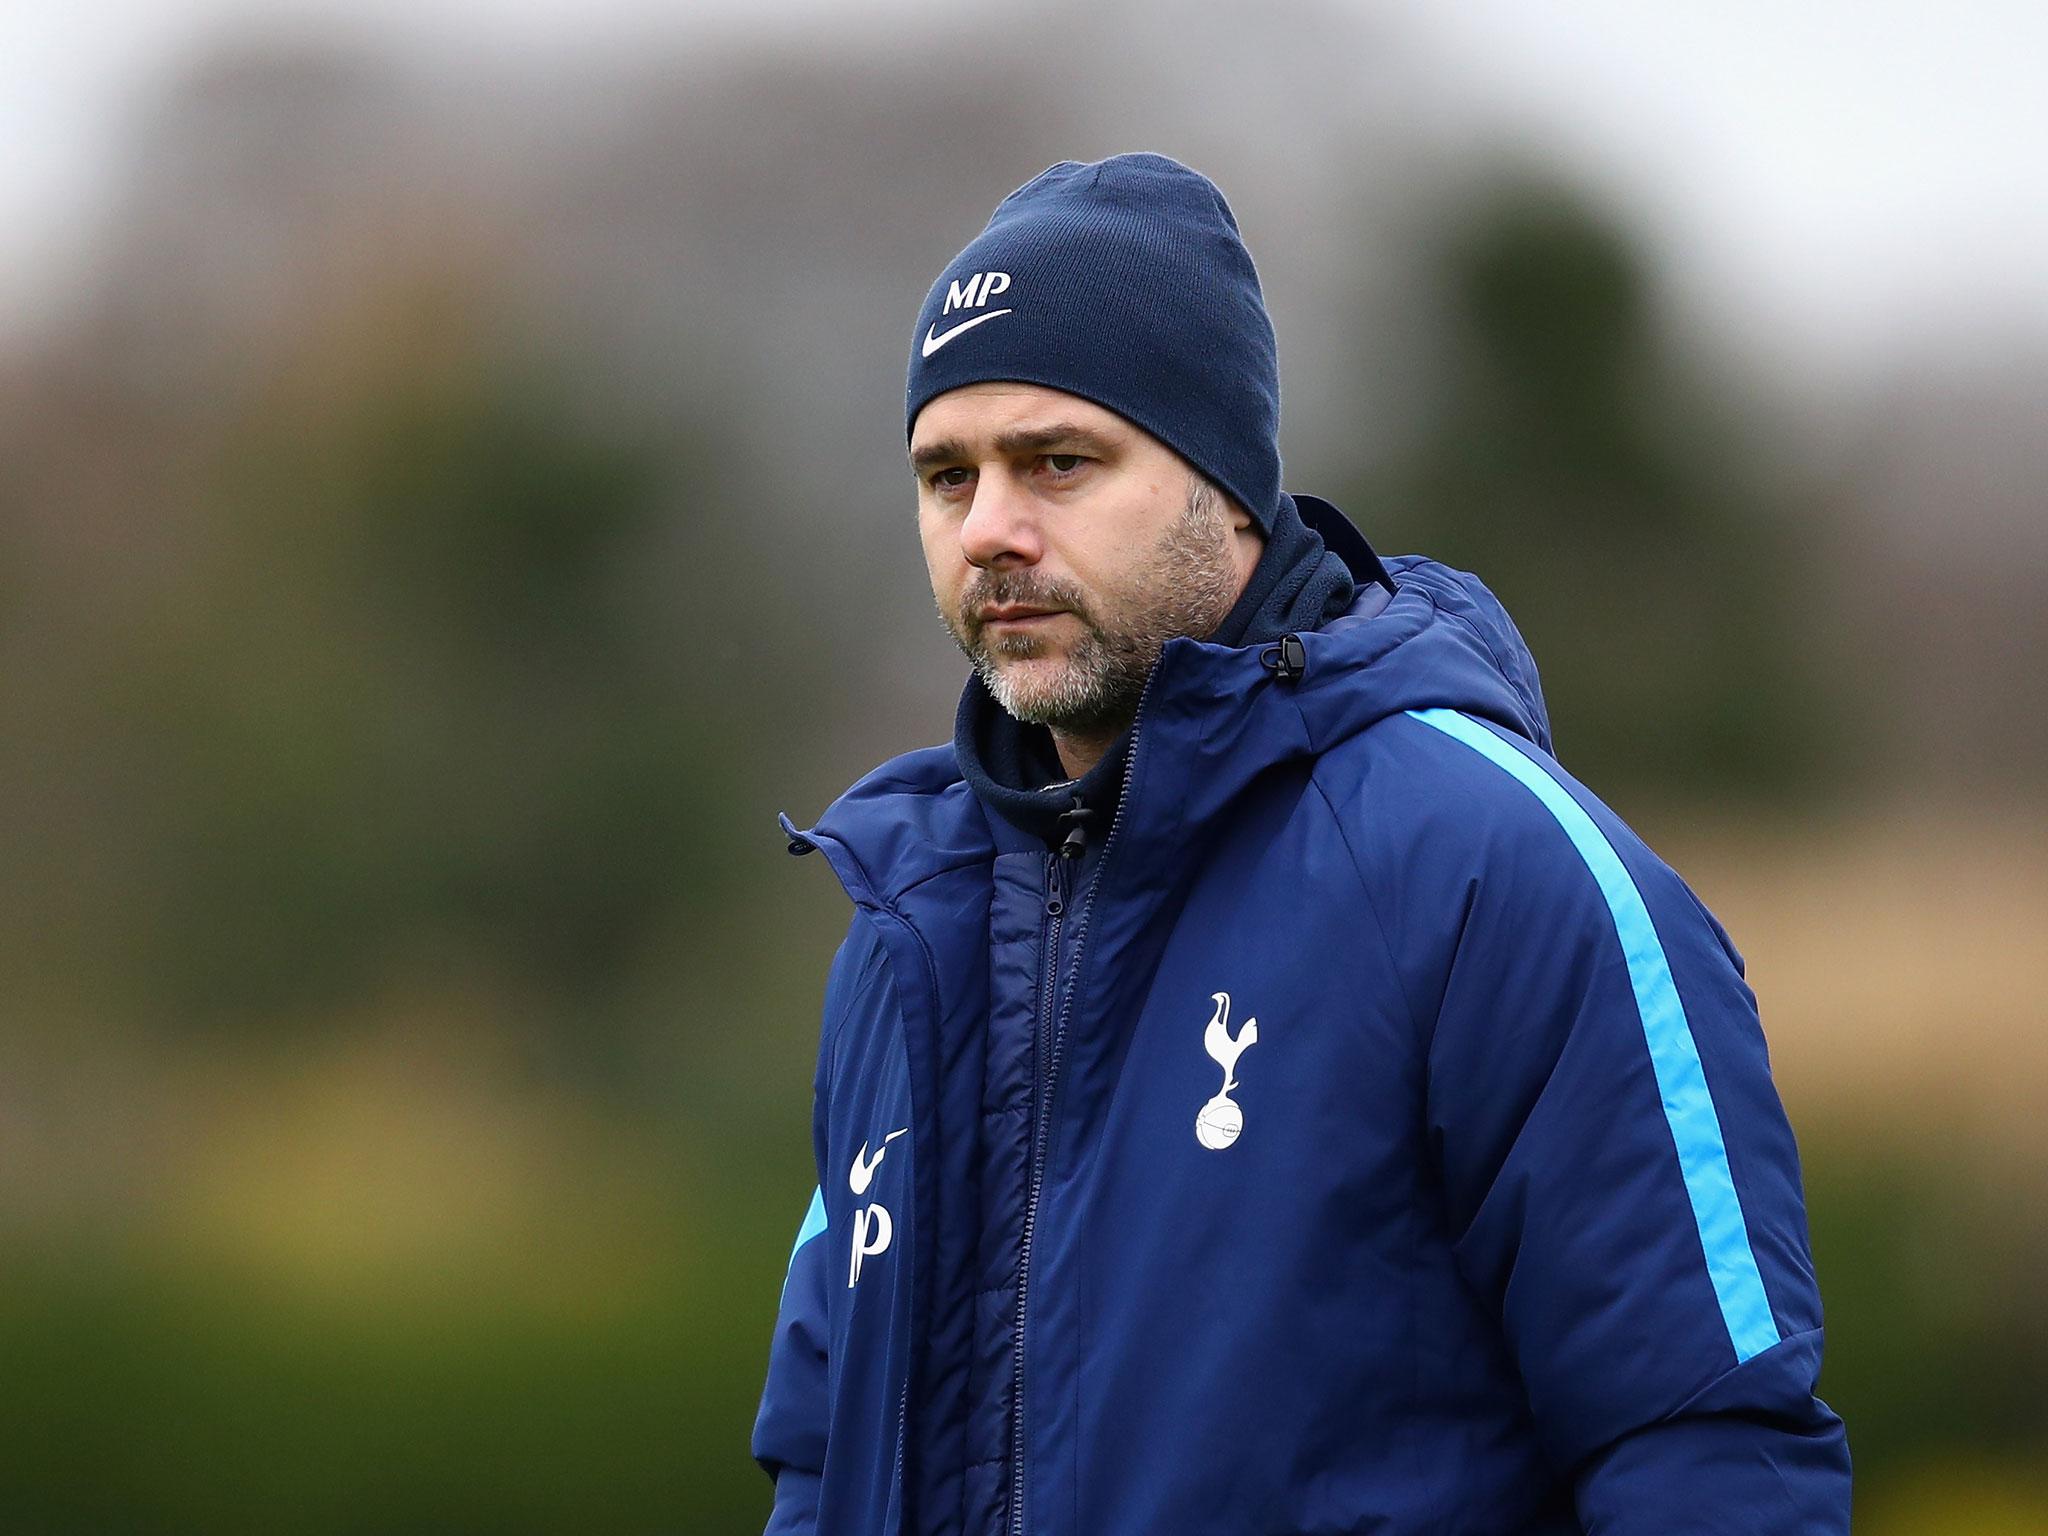 The Tottenham boss said it was possible his side have become over-confident